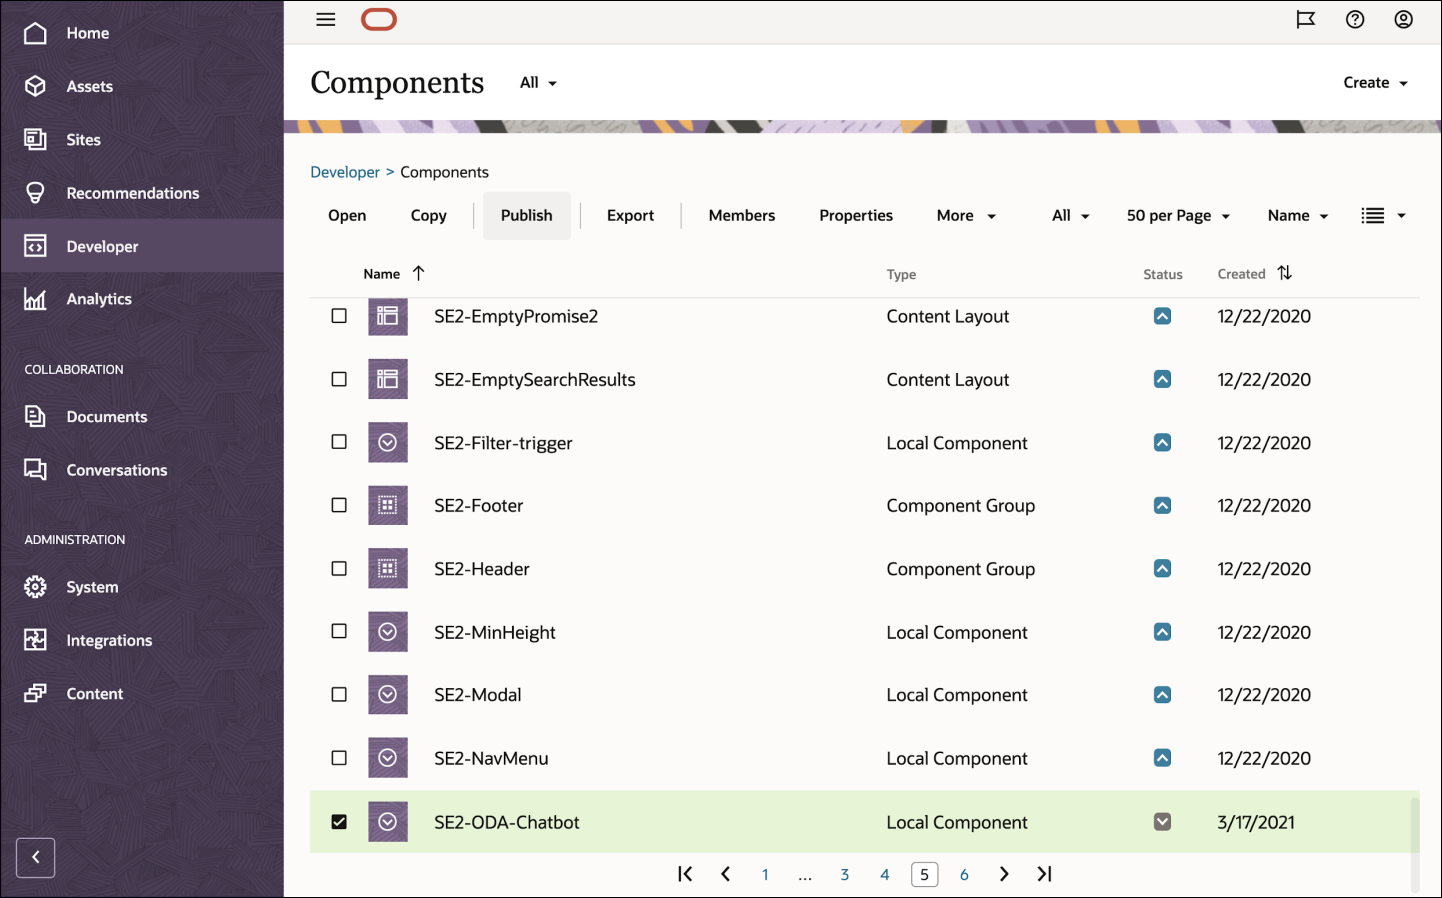 This image shows the Components page with the SE2-ODA-Chatbot component selected and the Publish option enabled.